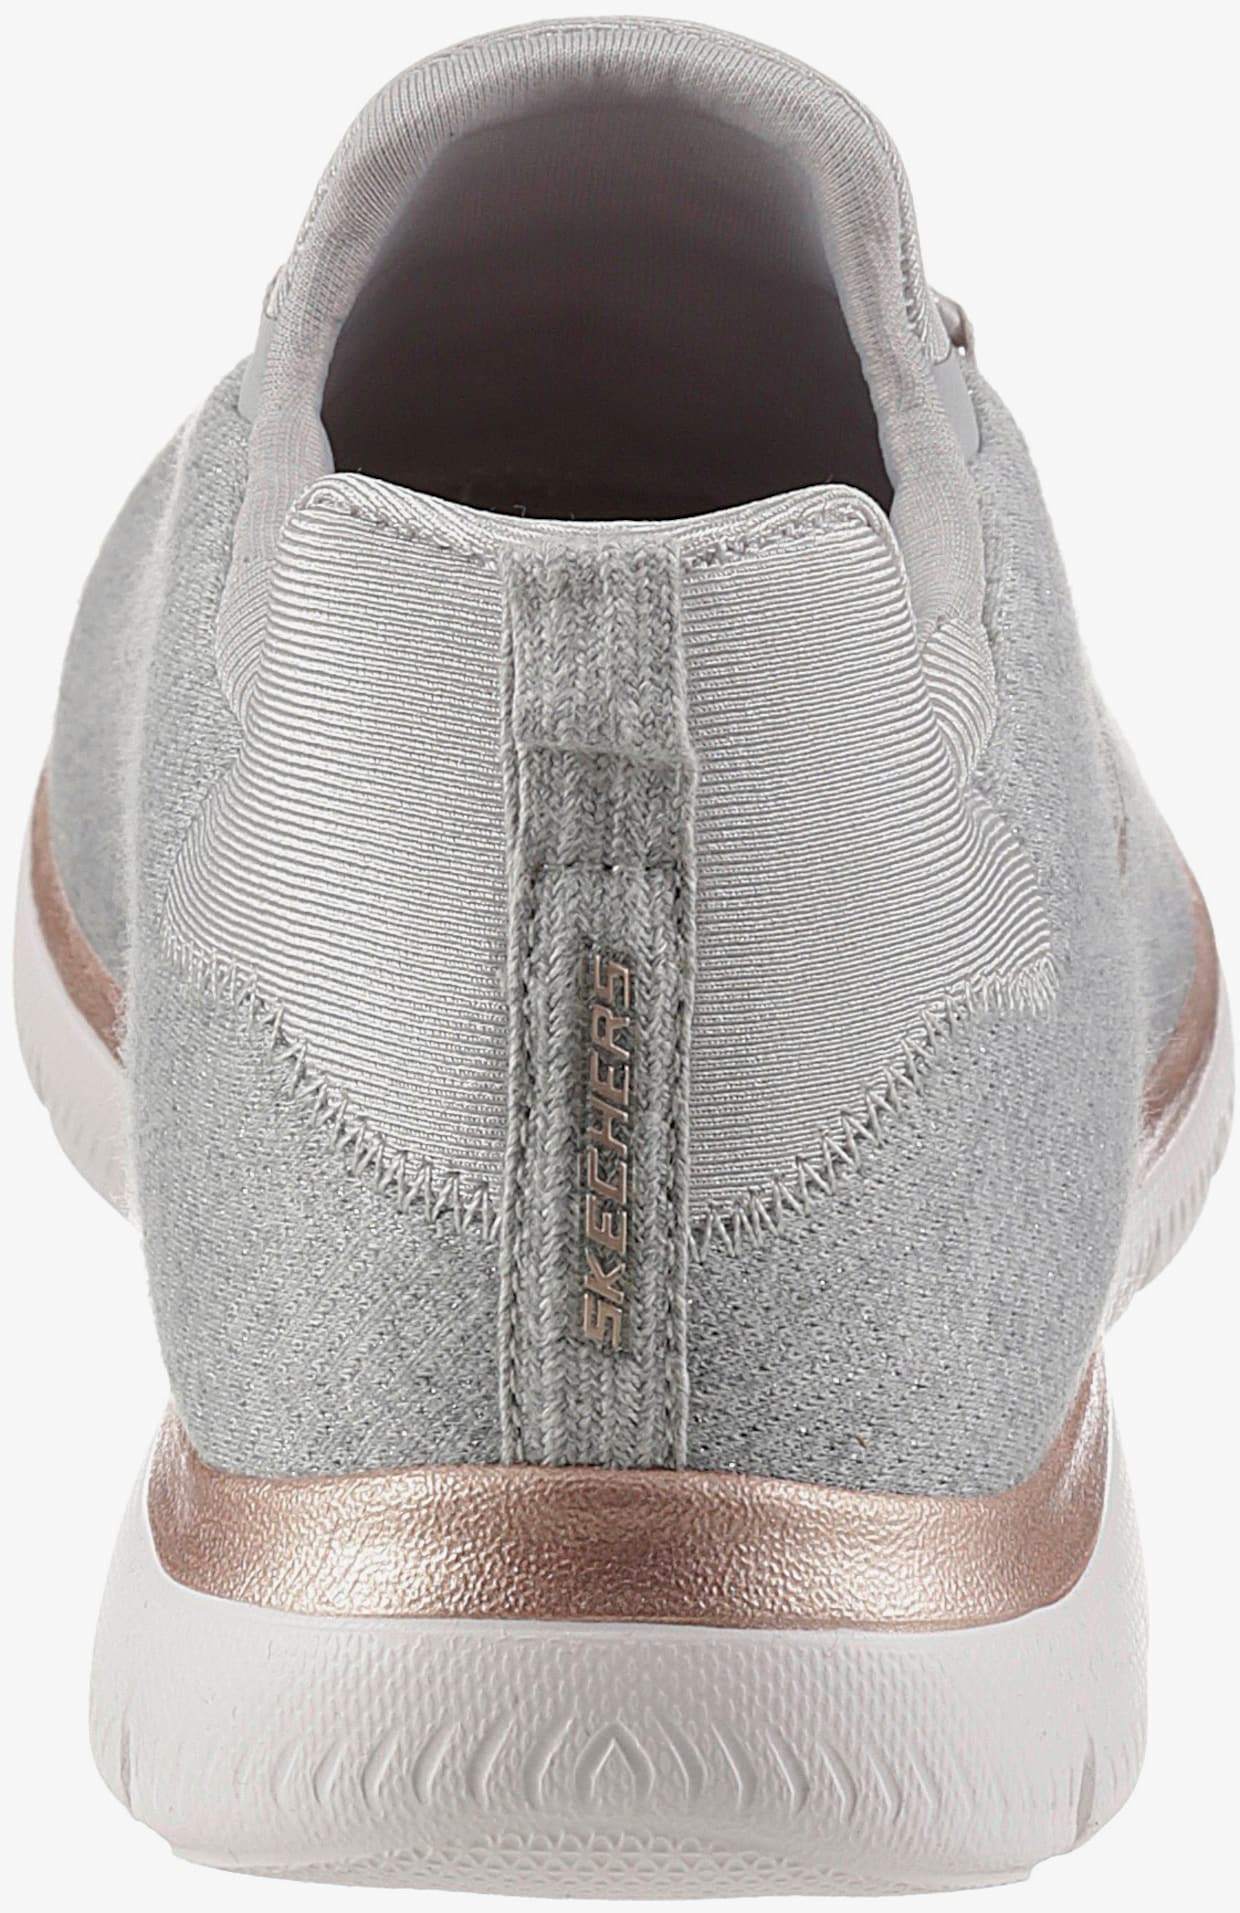 Skechers Sneakers slip on - gris chiné